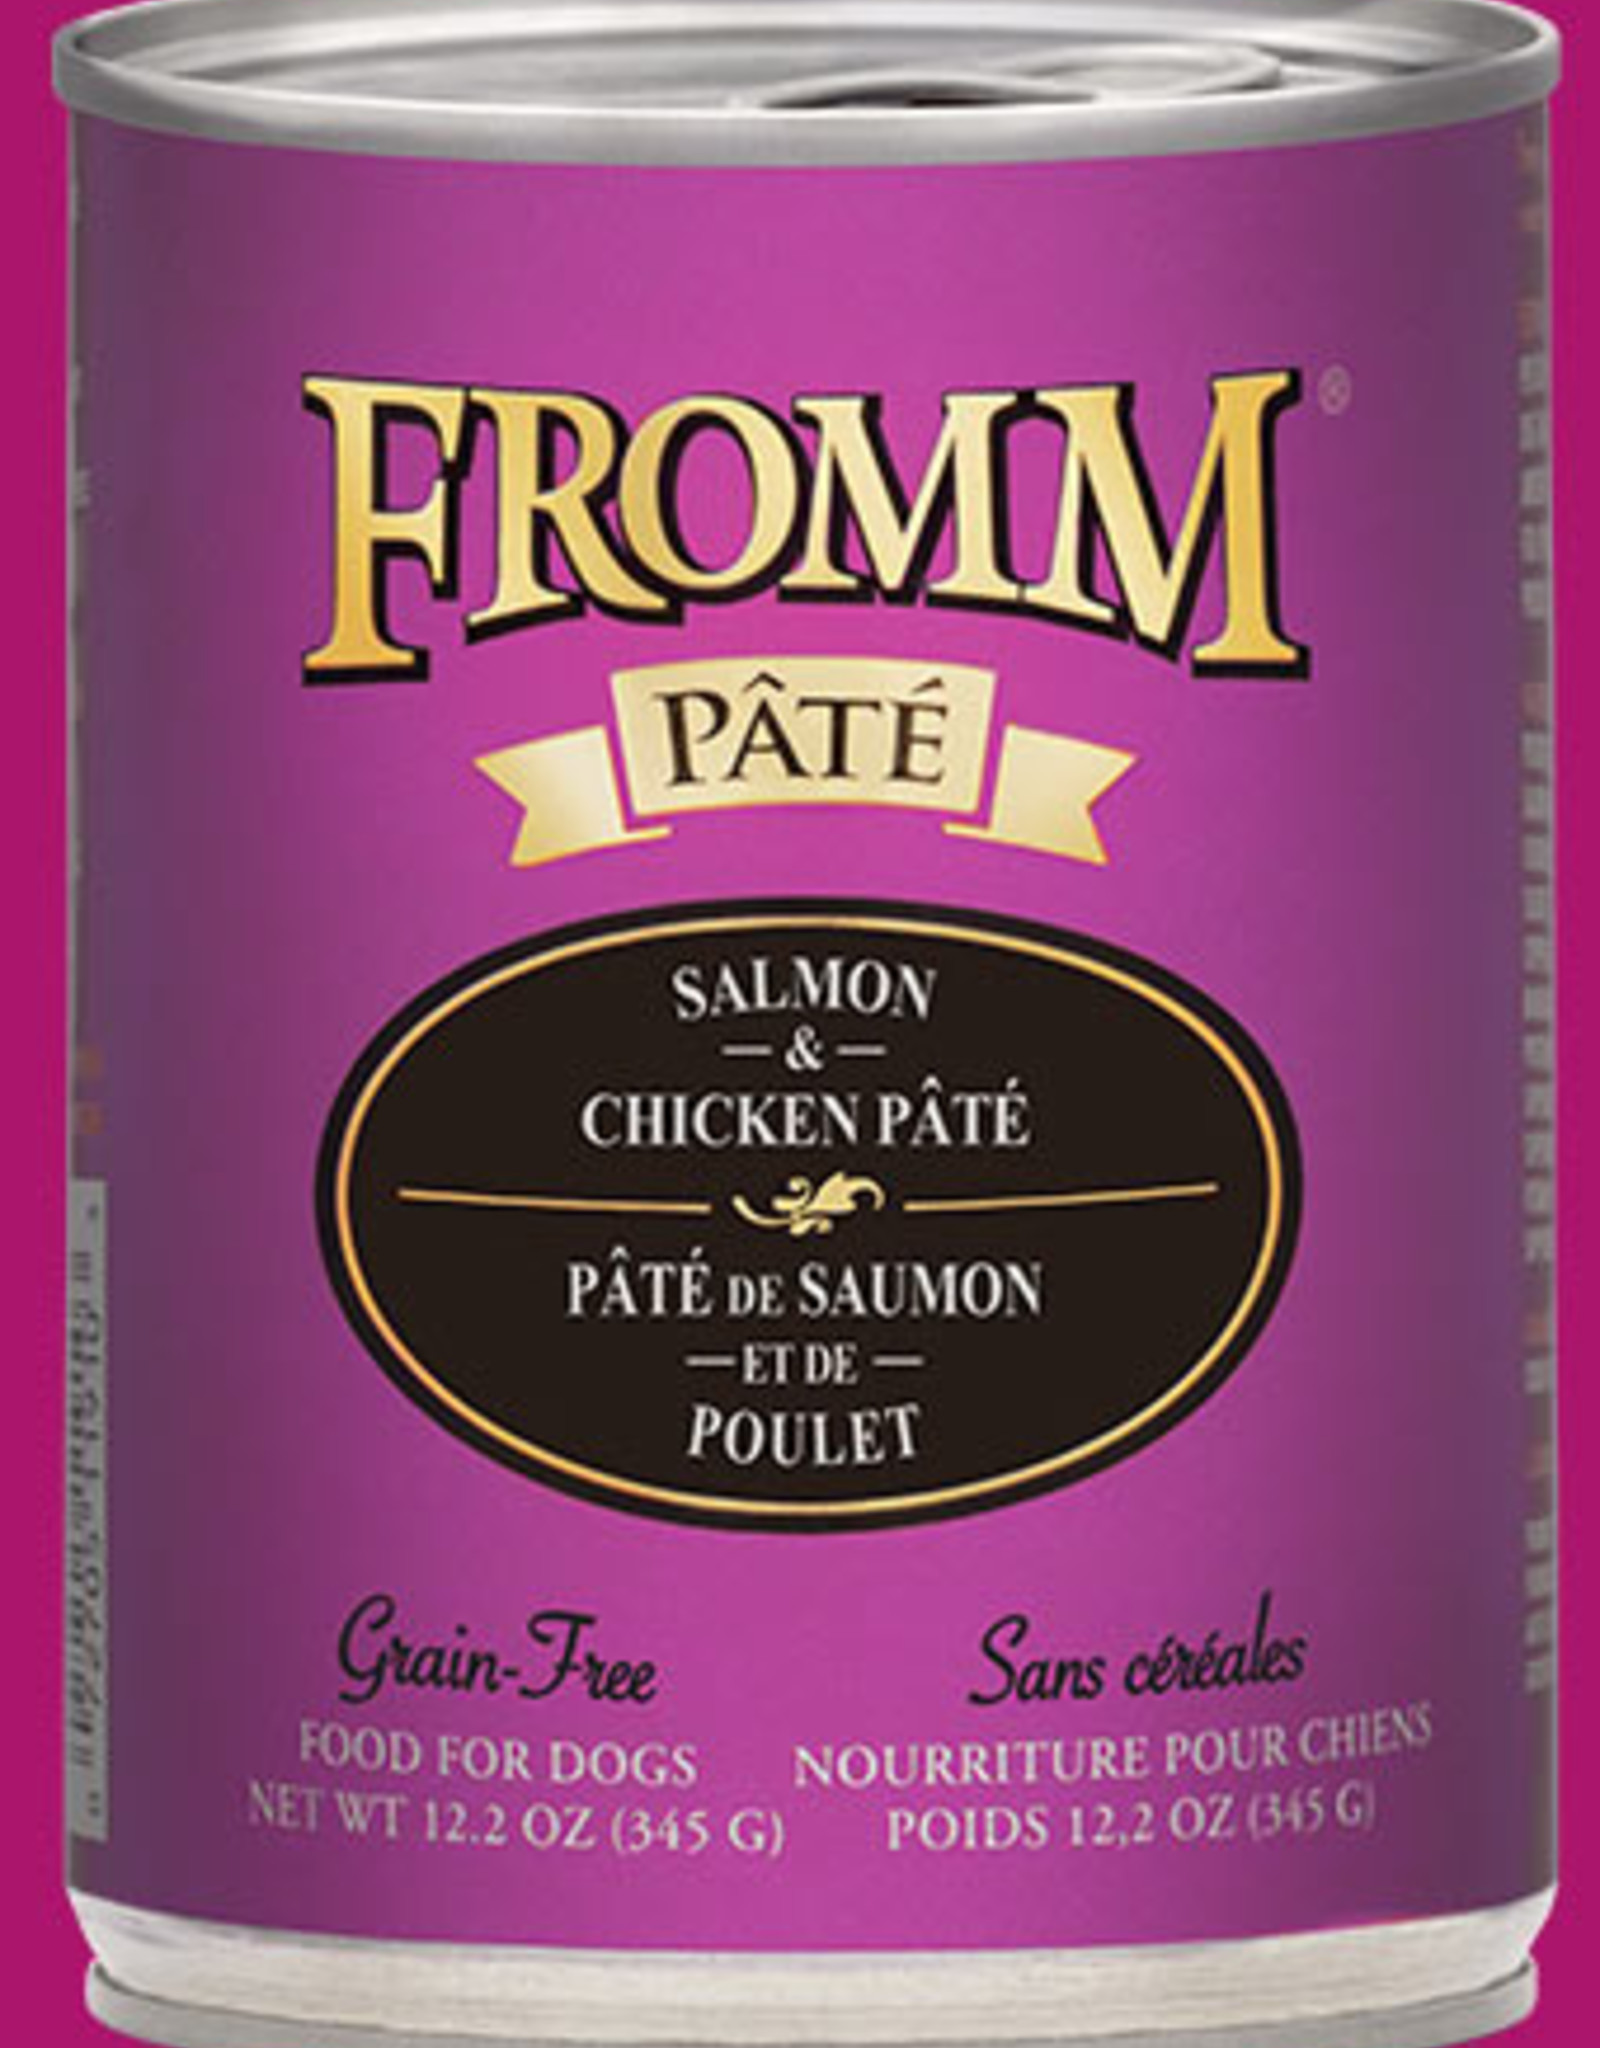 FROMM FAMILY FOODS LLC FROMM DOG PATE SALMON & CHICKEN CAN 12.2OZ CASE OF 12